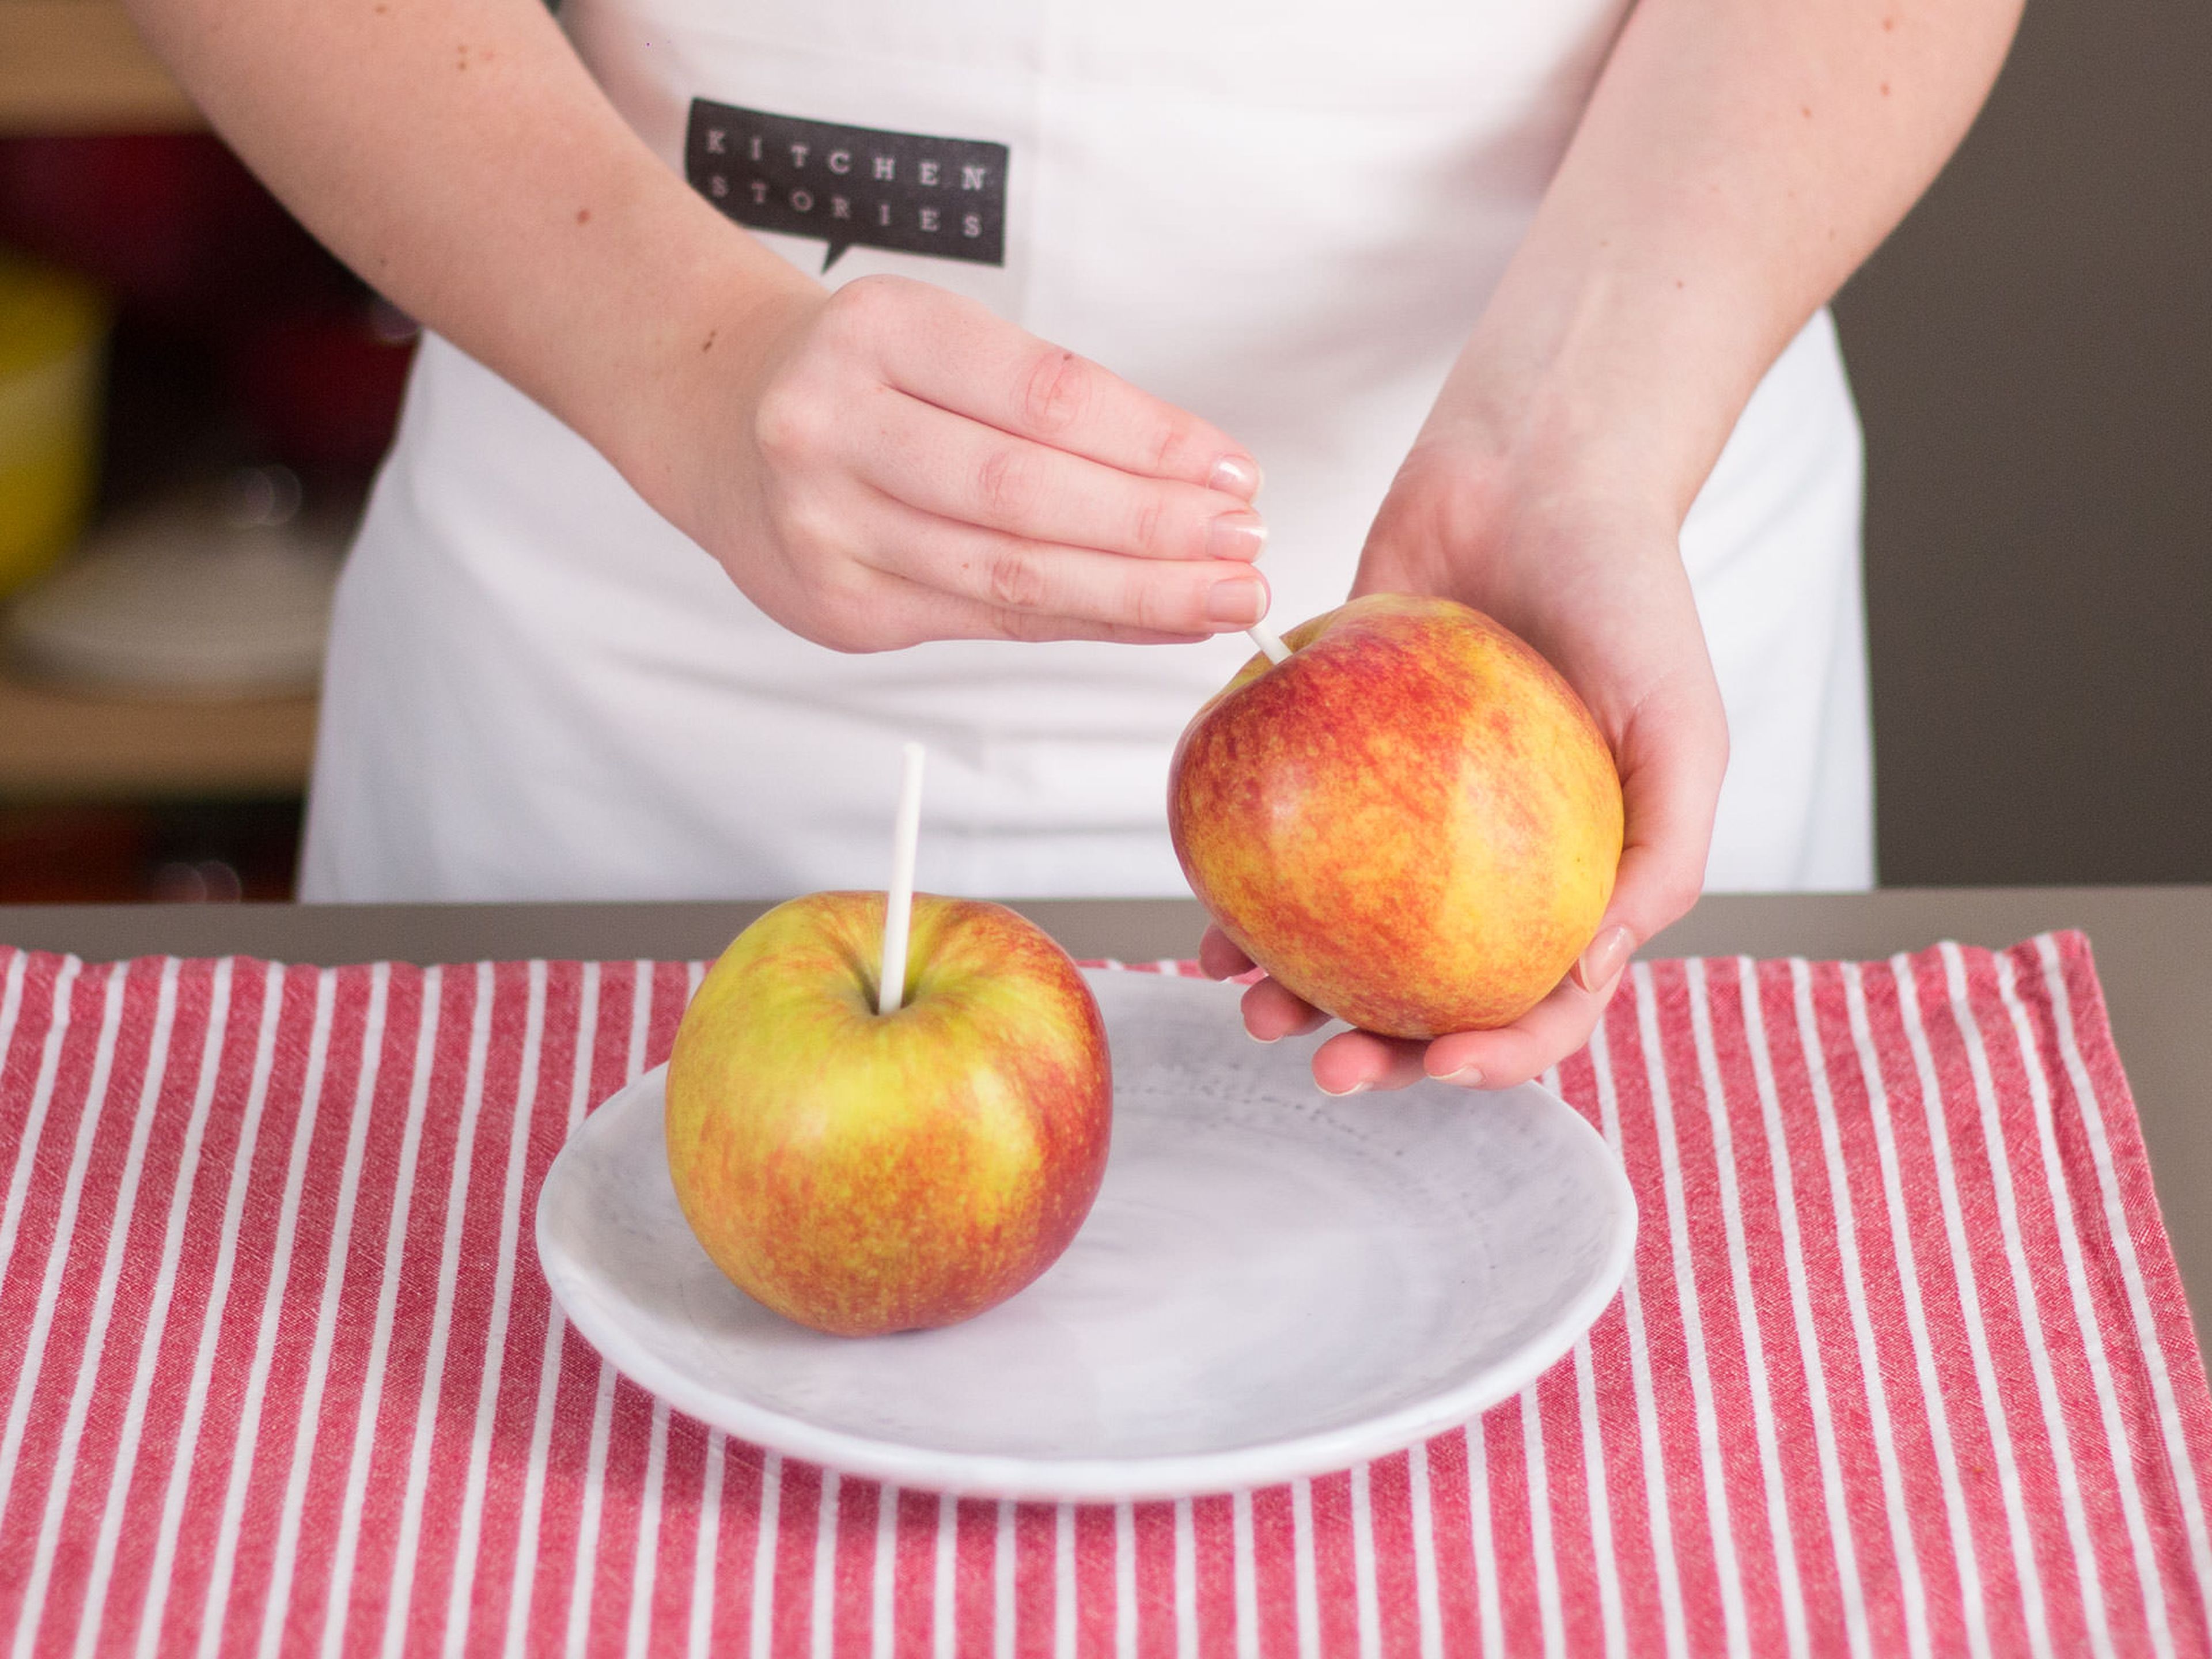 Press a thick wooden skewer into the center of each apple and place in freezer for approx. 1 hr.